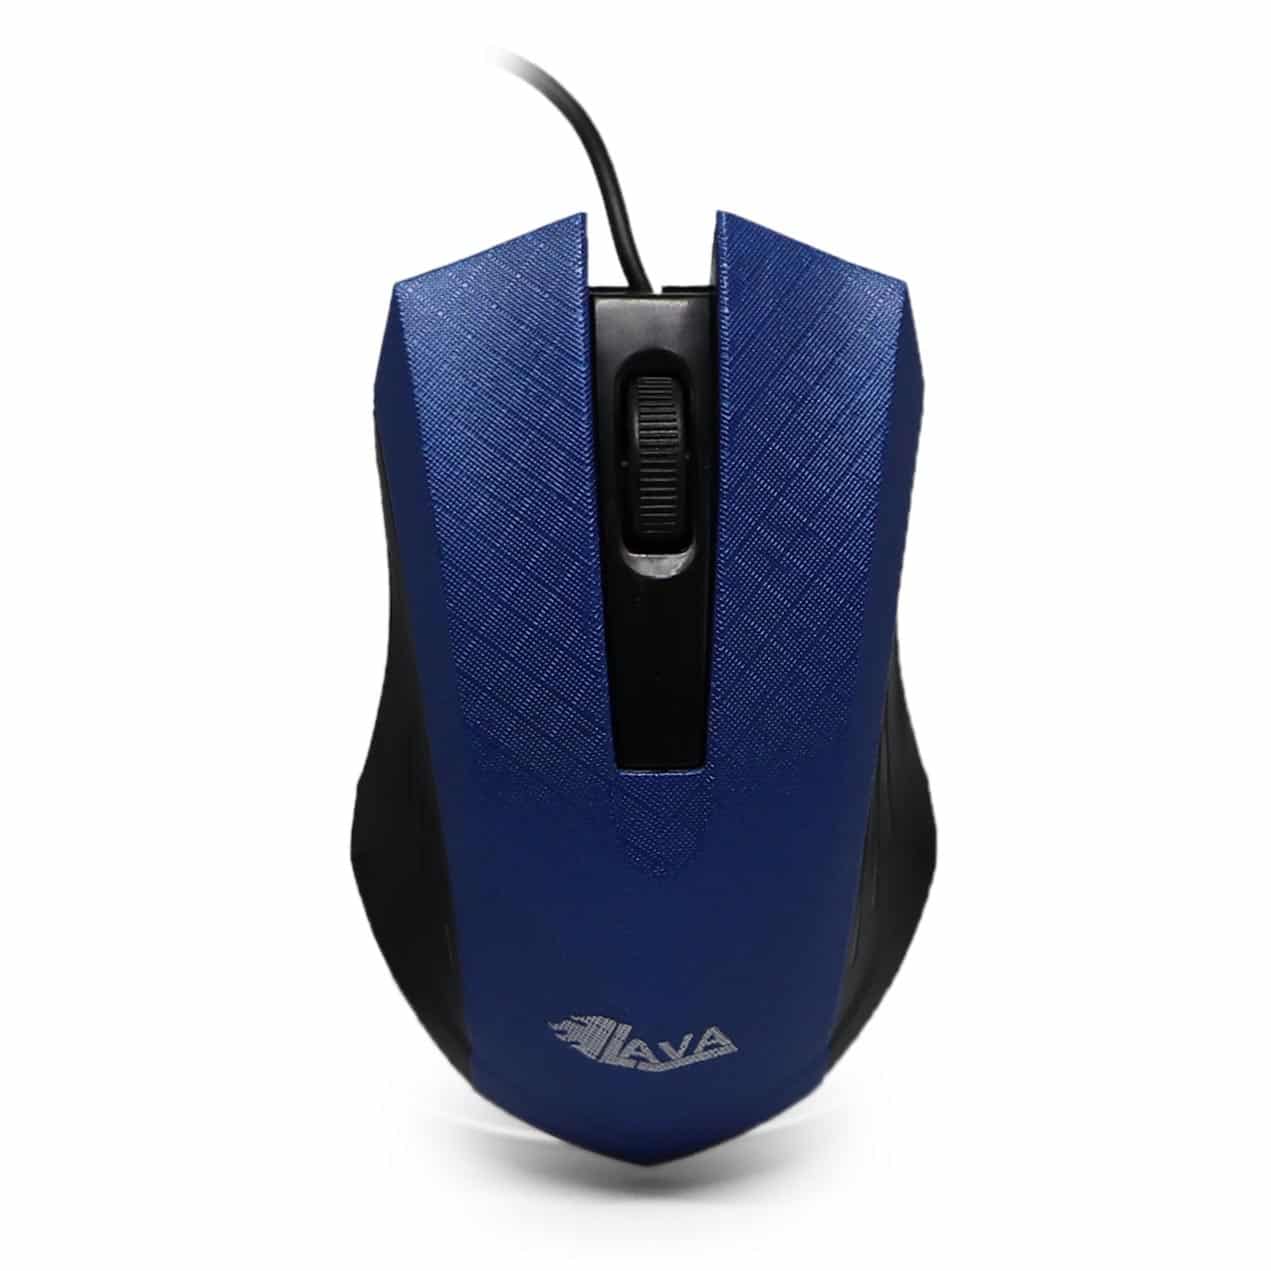 Lava Wired Mouse, Black and Blue - ST 5